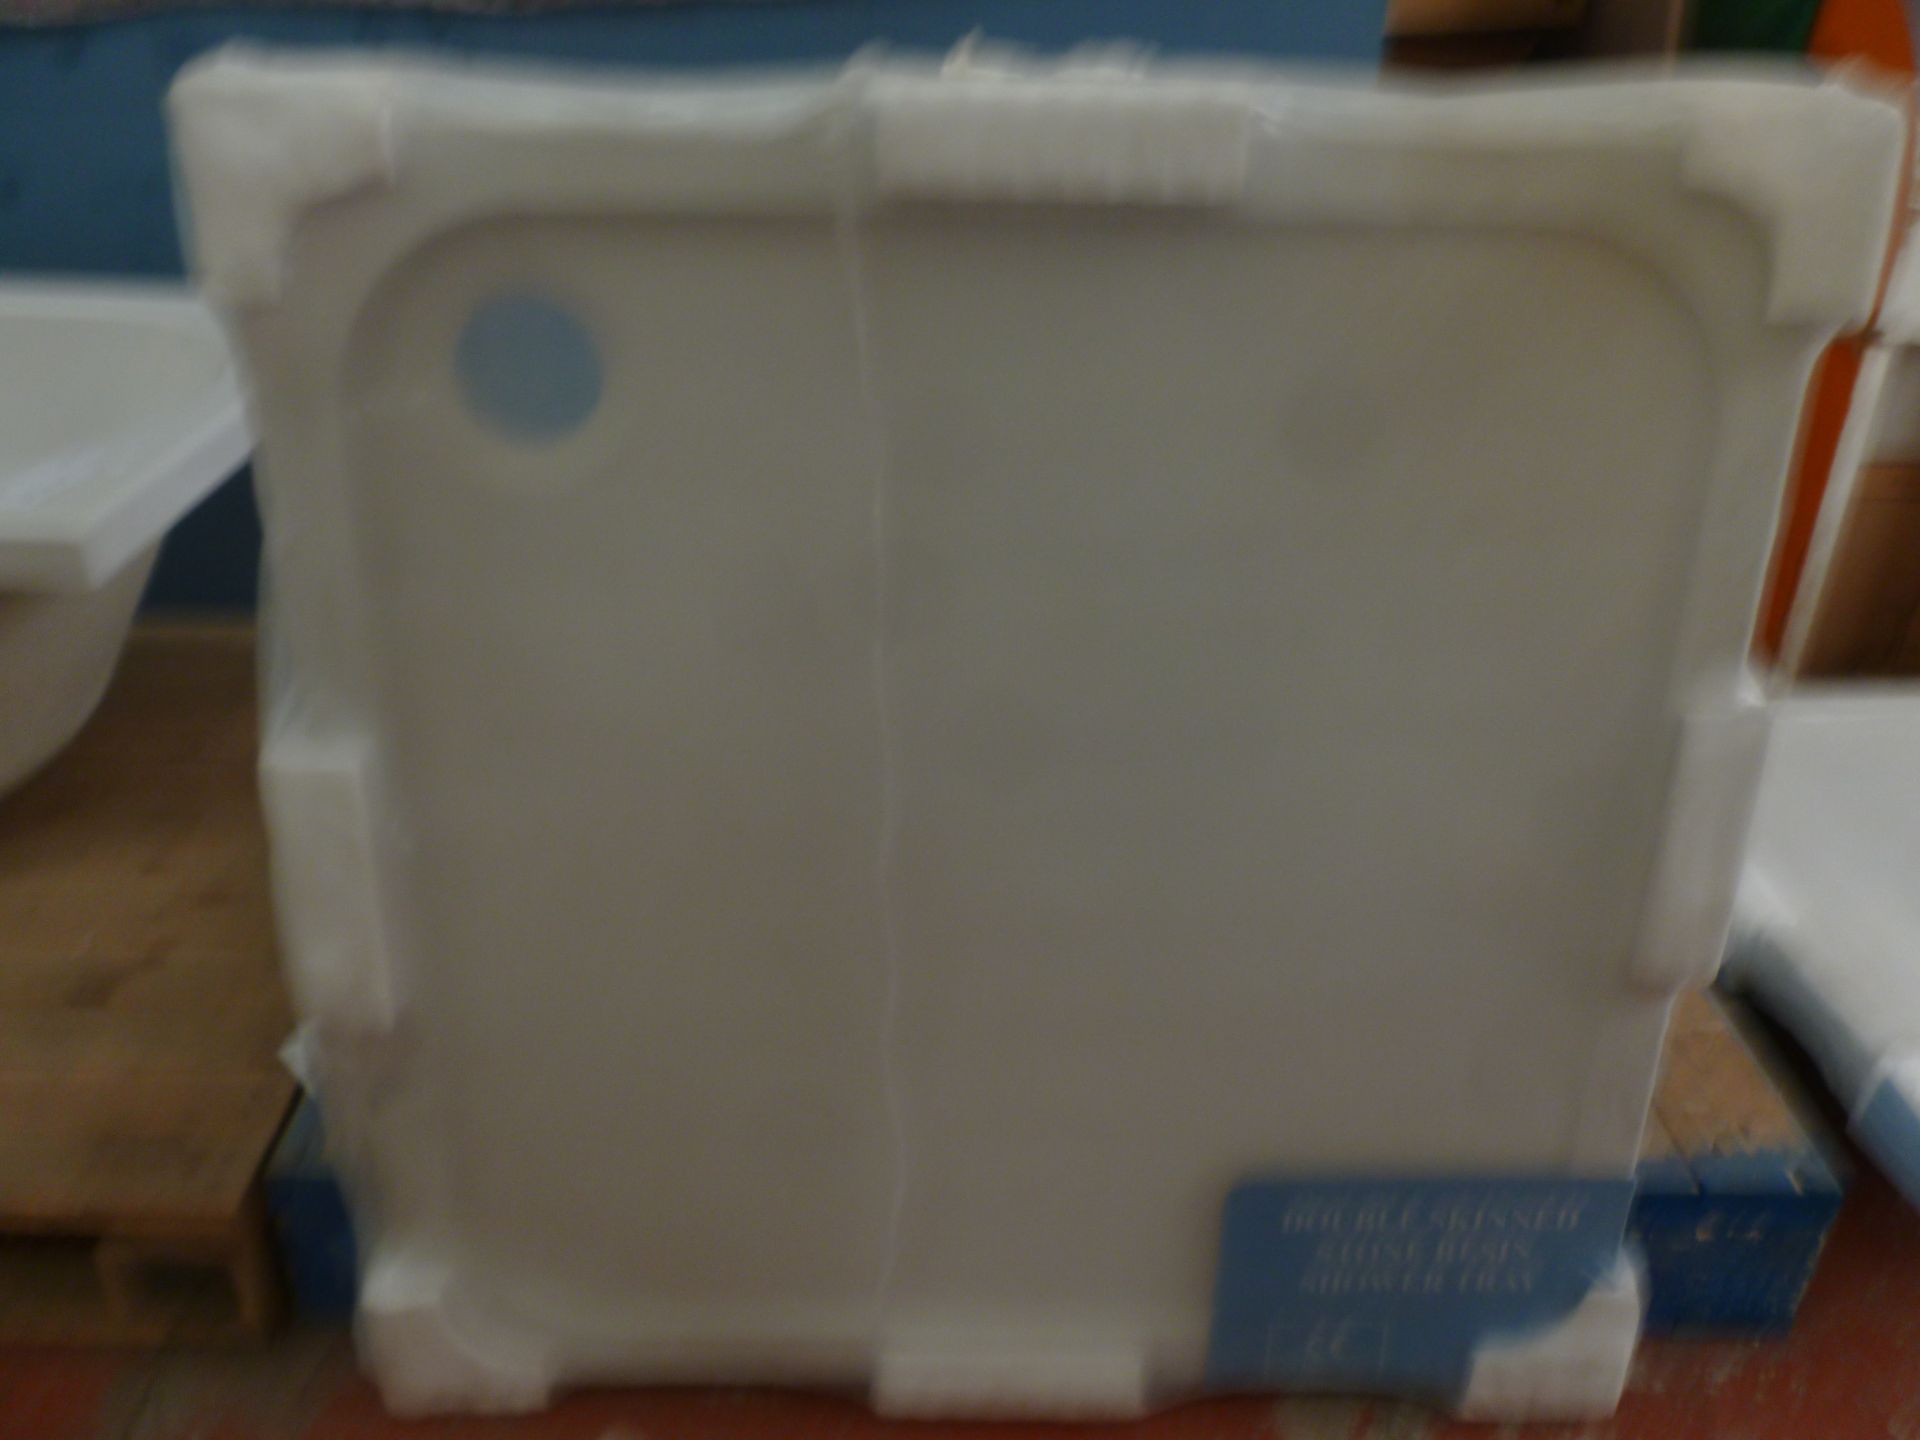 Brista 900 Square Blu Gem Shower Tray. New and sealed.